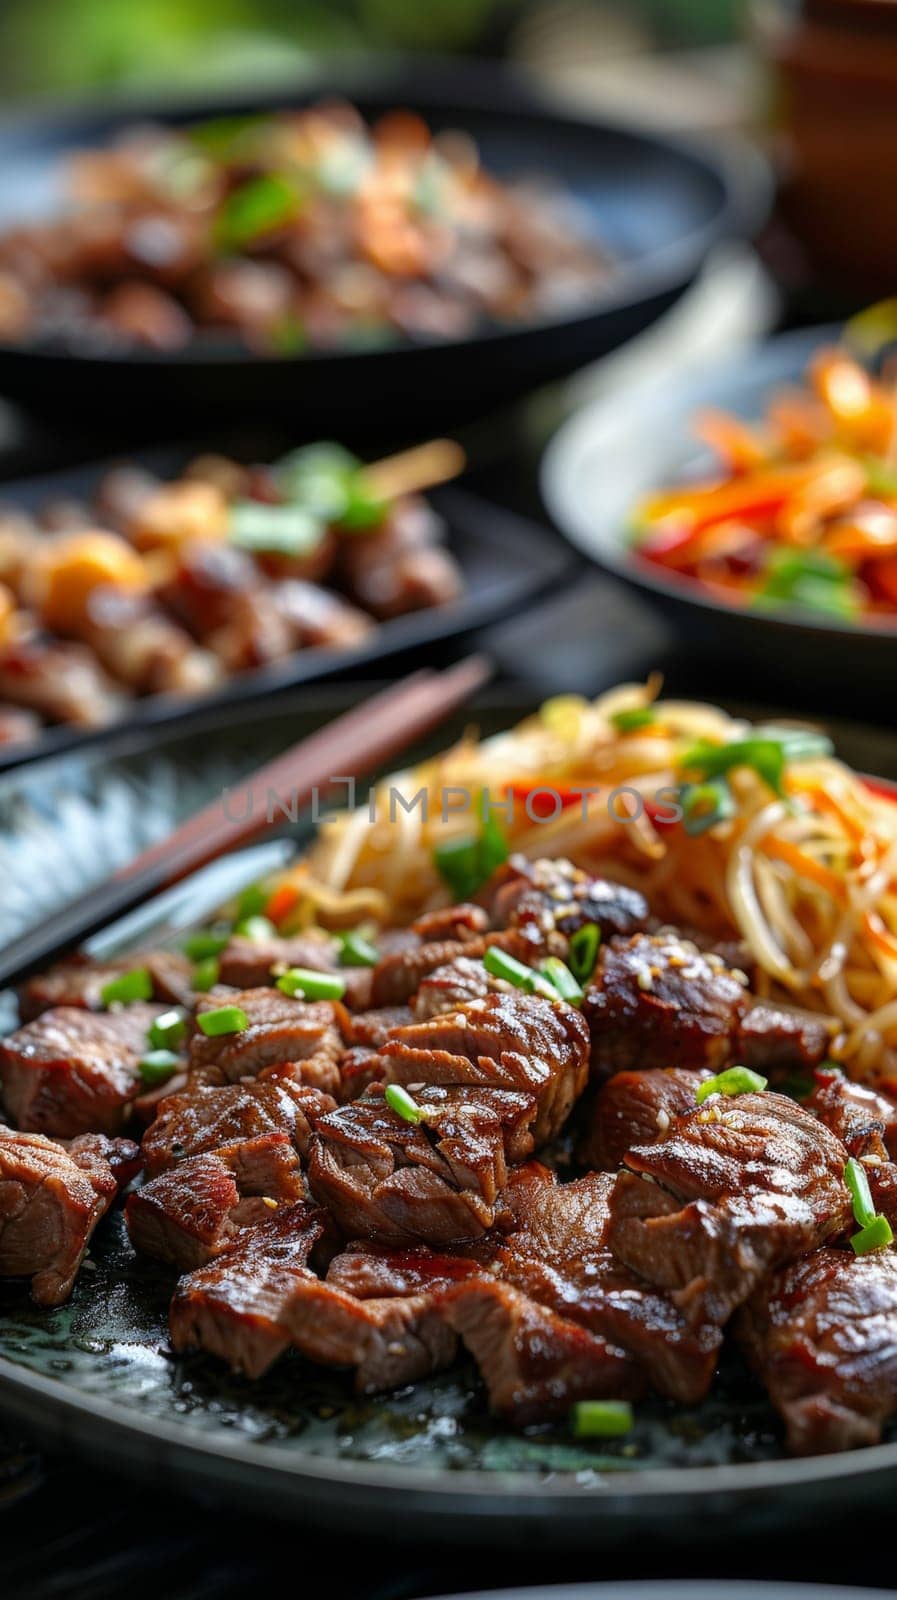 A plate of meat and noodles on a table with chopsticks